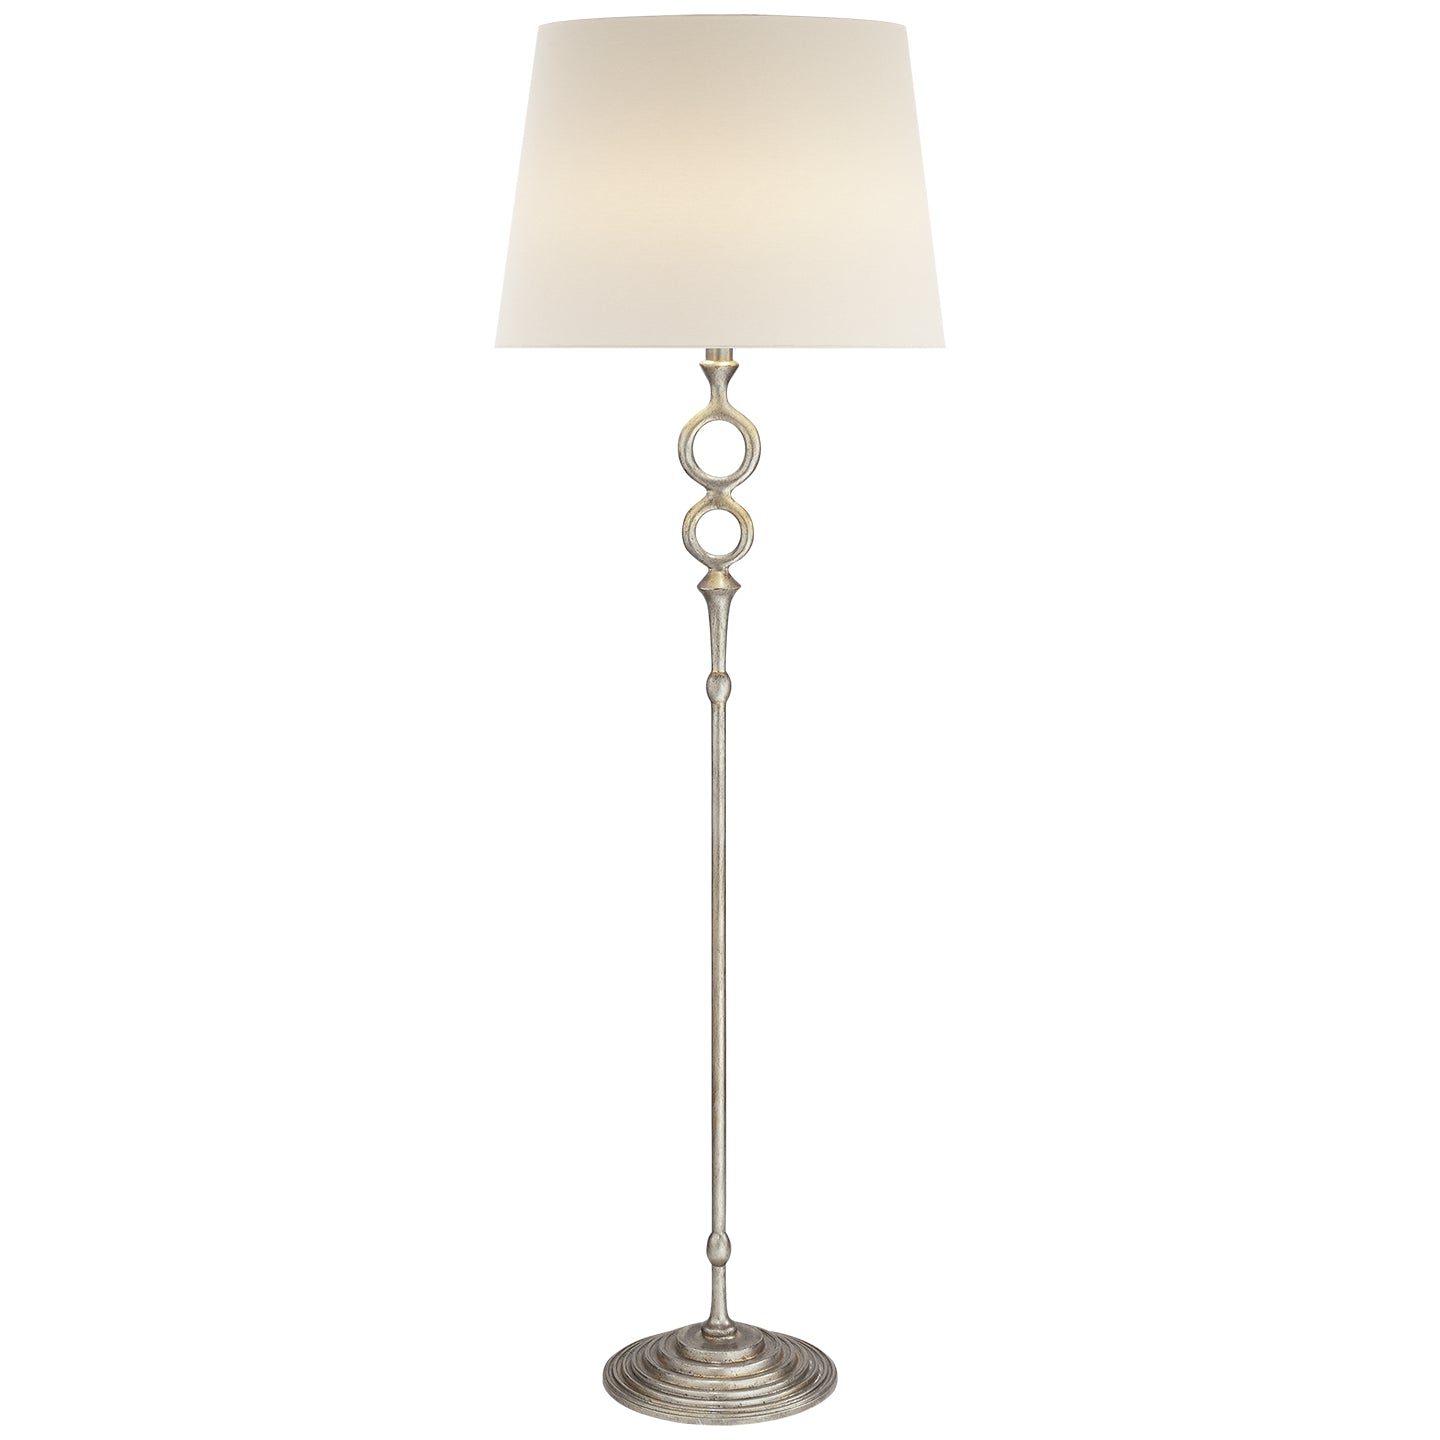 Load image into Gallery viewer, Visual Comfort Signature - ARN 1022BSL-L - Two Light Floor Lamp - bristol2 - Burnished Silver Leaf
